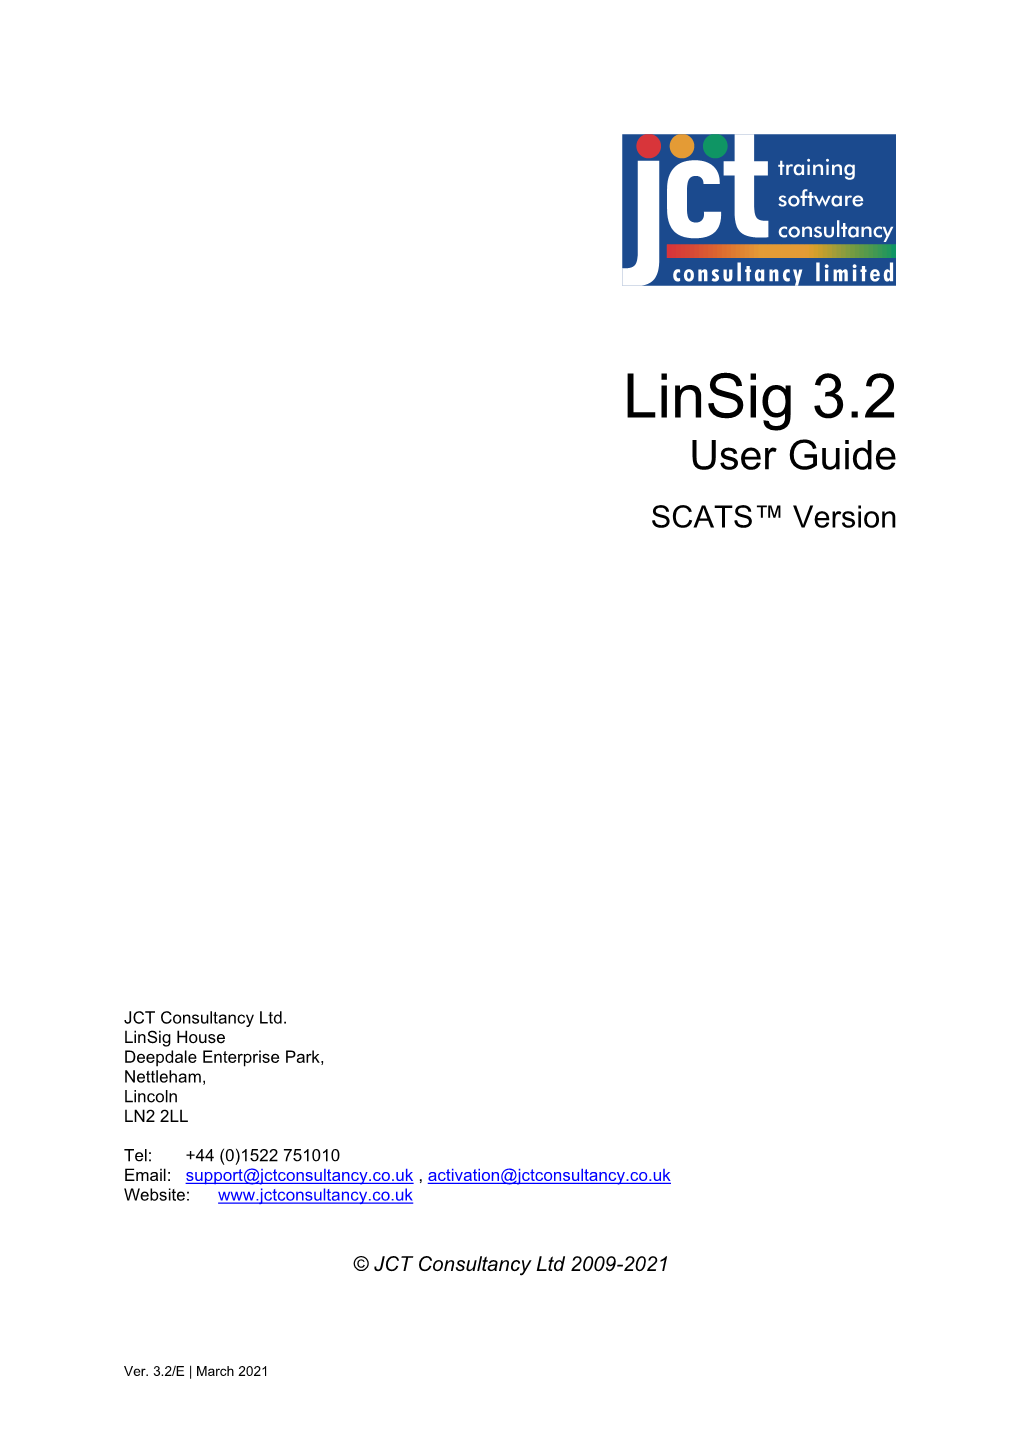 Linsig Version 3.2 User Guide (SCATS™)